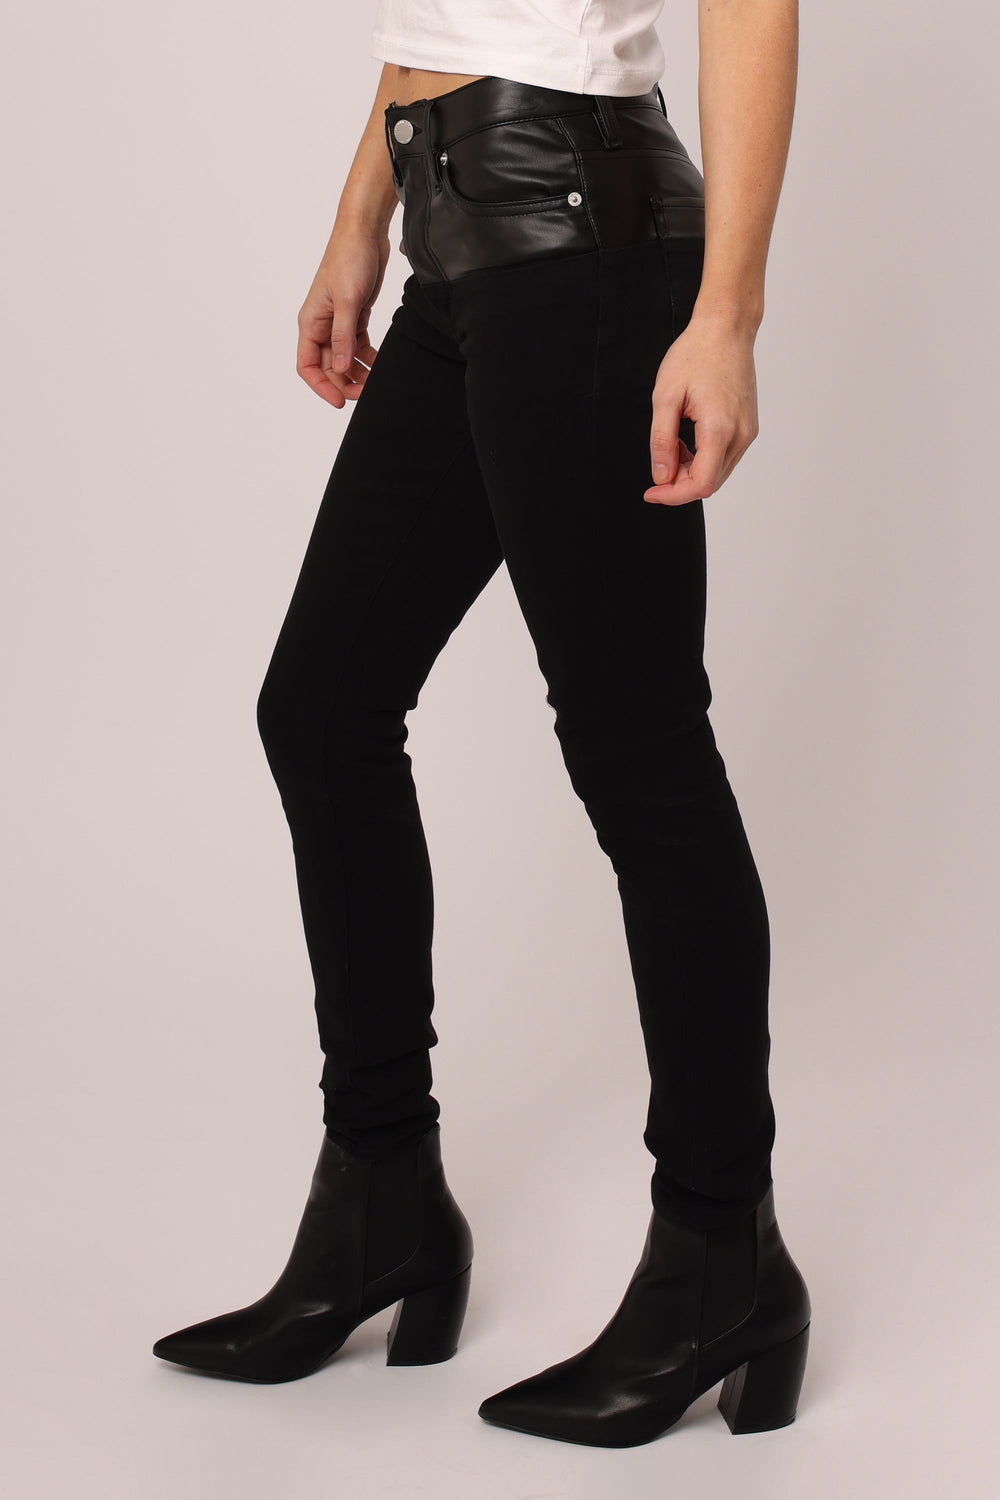 image of a female model wearing a PIXIE HIGH RISE ANKLE SKINNY JEANS BLACK JEANS